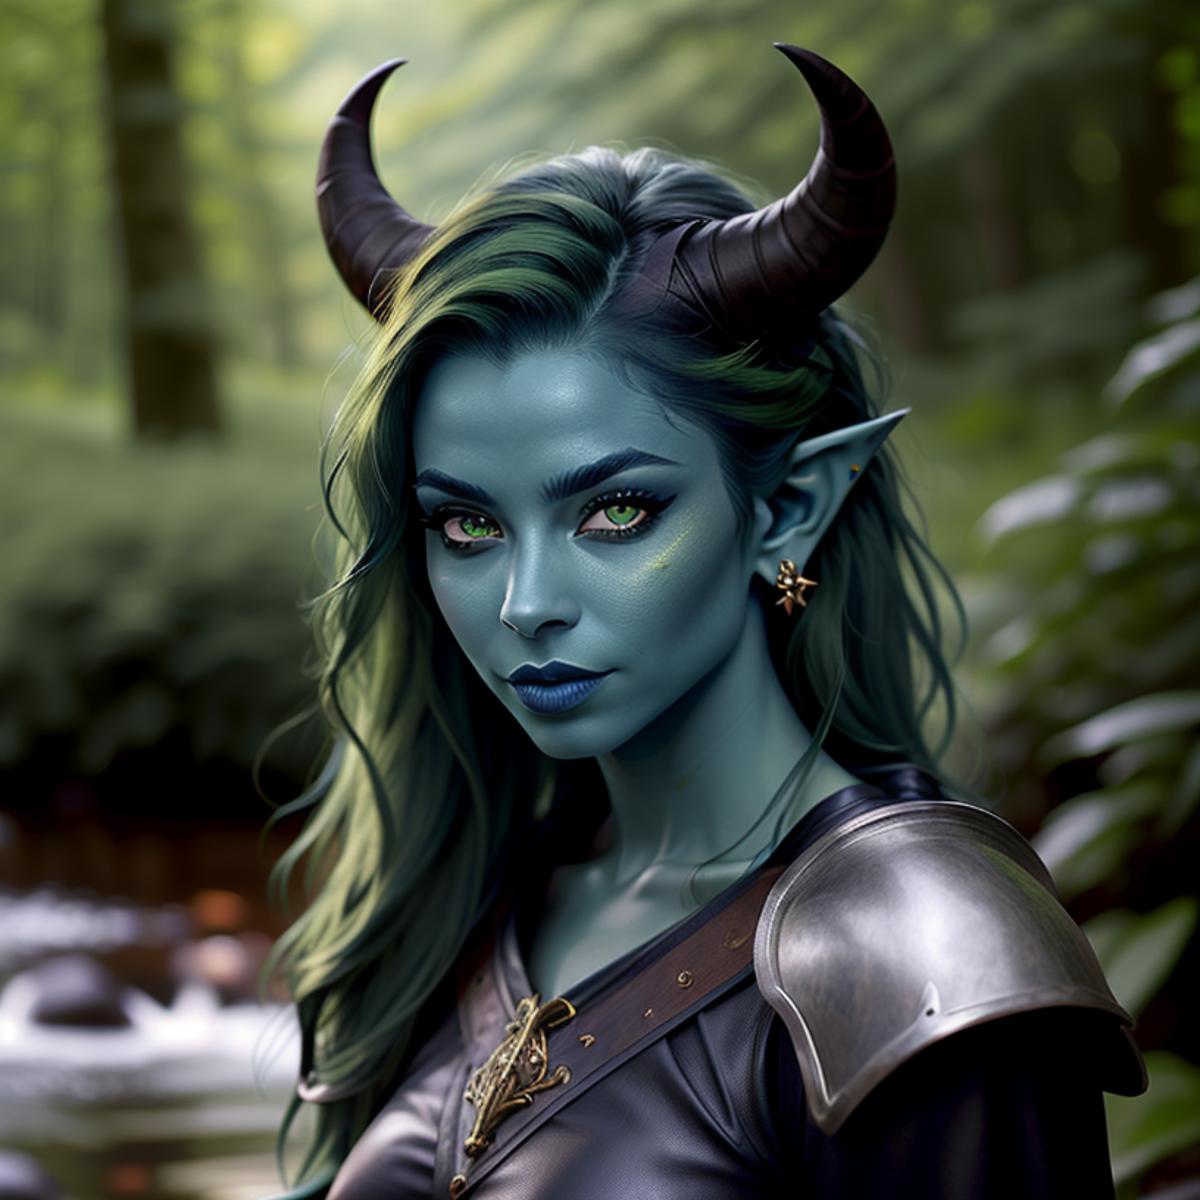 Tiefling Concept LoRA image by feanor227227